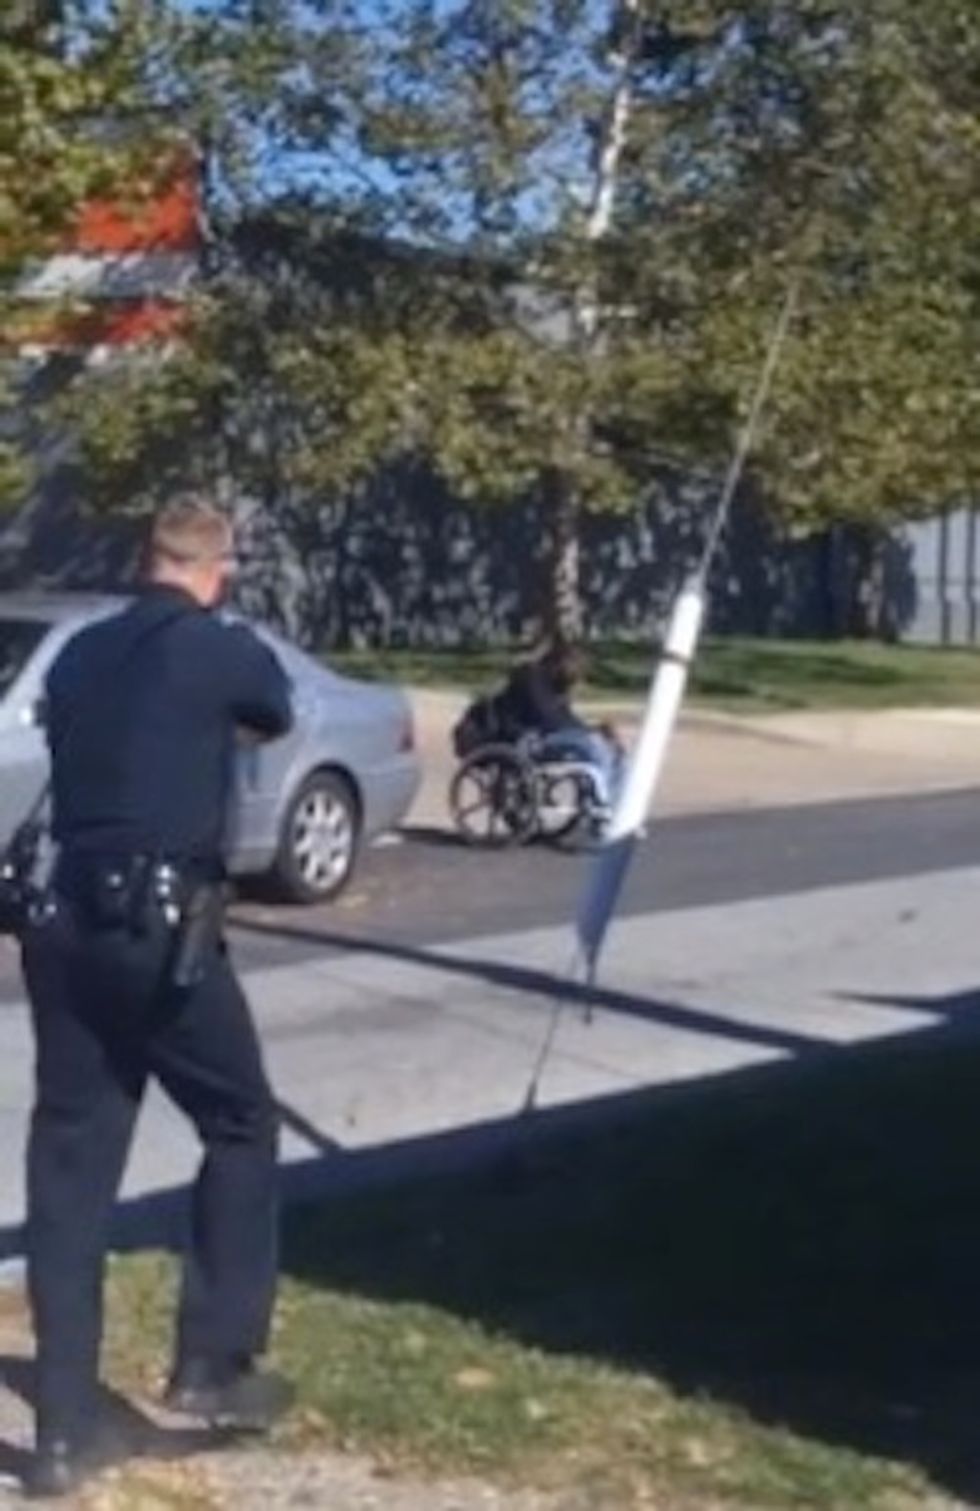 Shock Video Shows the Moment Police Shoot and Kill Armed Man in Wheelchair: ‘Hands Up!’